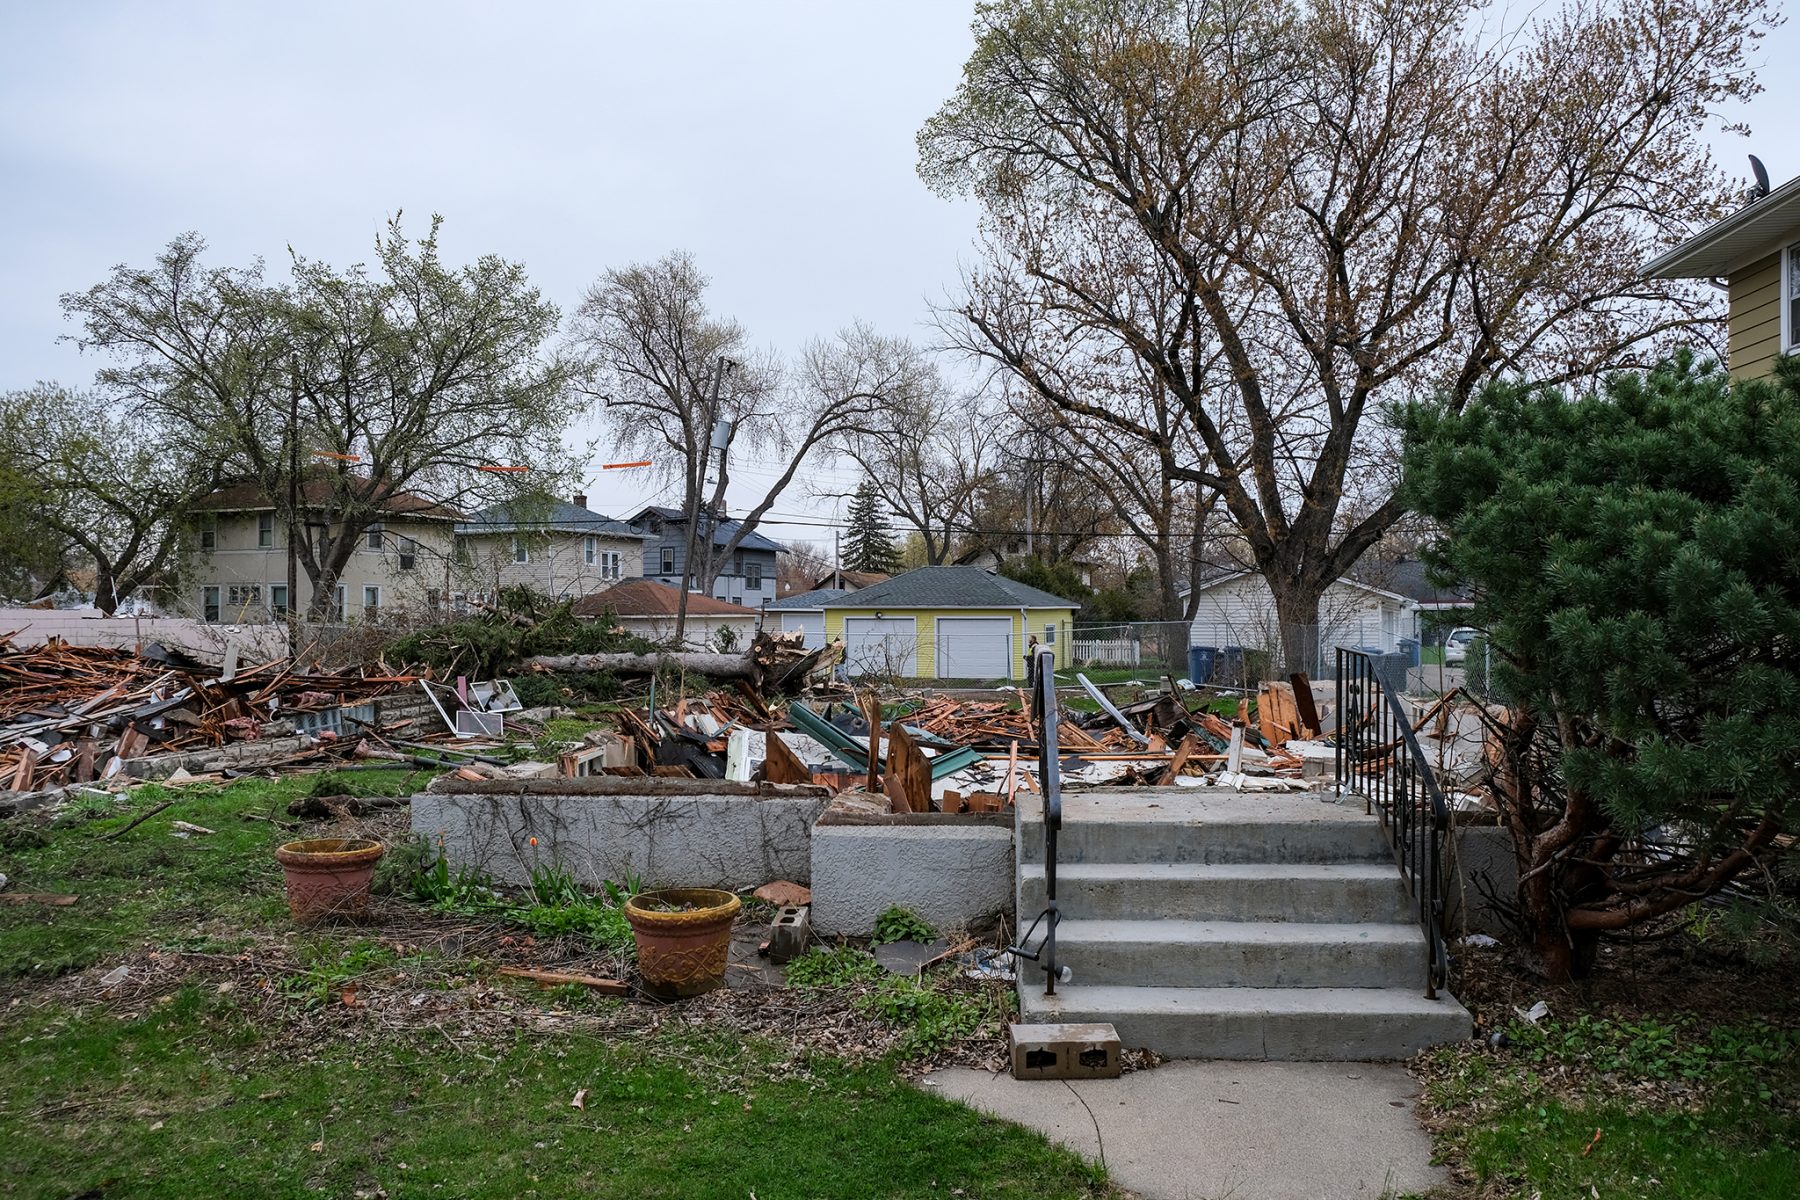 Only a flight of concrete steps remain as the demolition of two bungalows and a gas station begin.